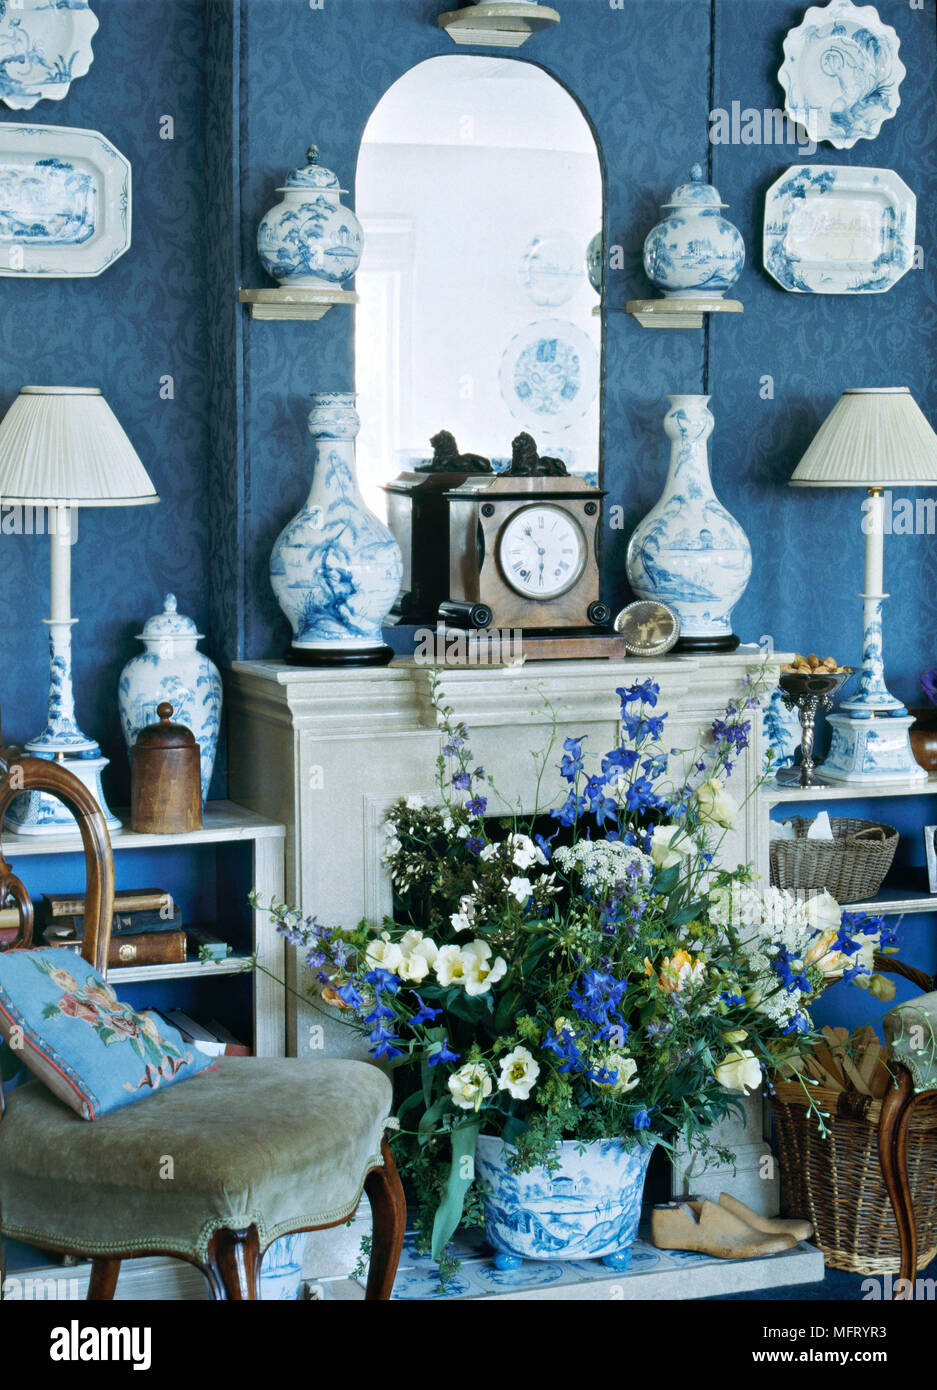 Sitting room fireplace blue wallpapered walls chair flower arrangement in fireplace clock  interiors rooms blue white china pair of lamps china on wal Stock Photo